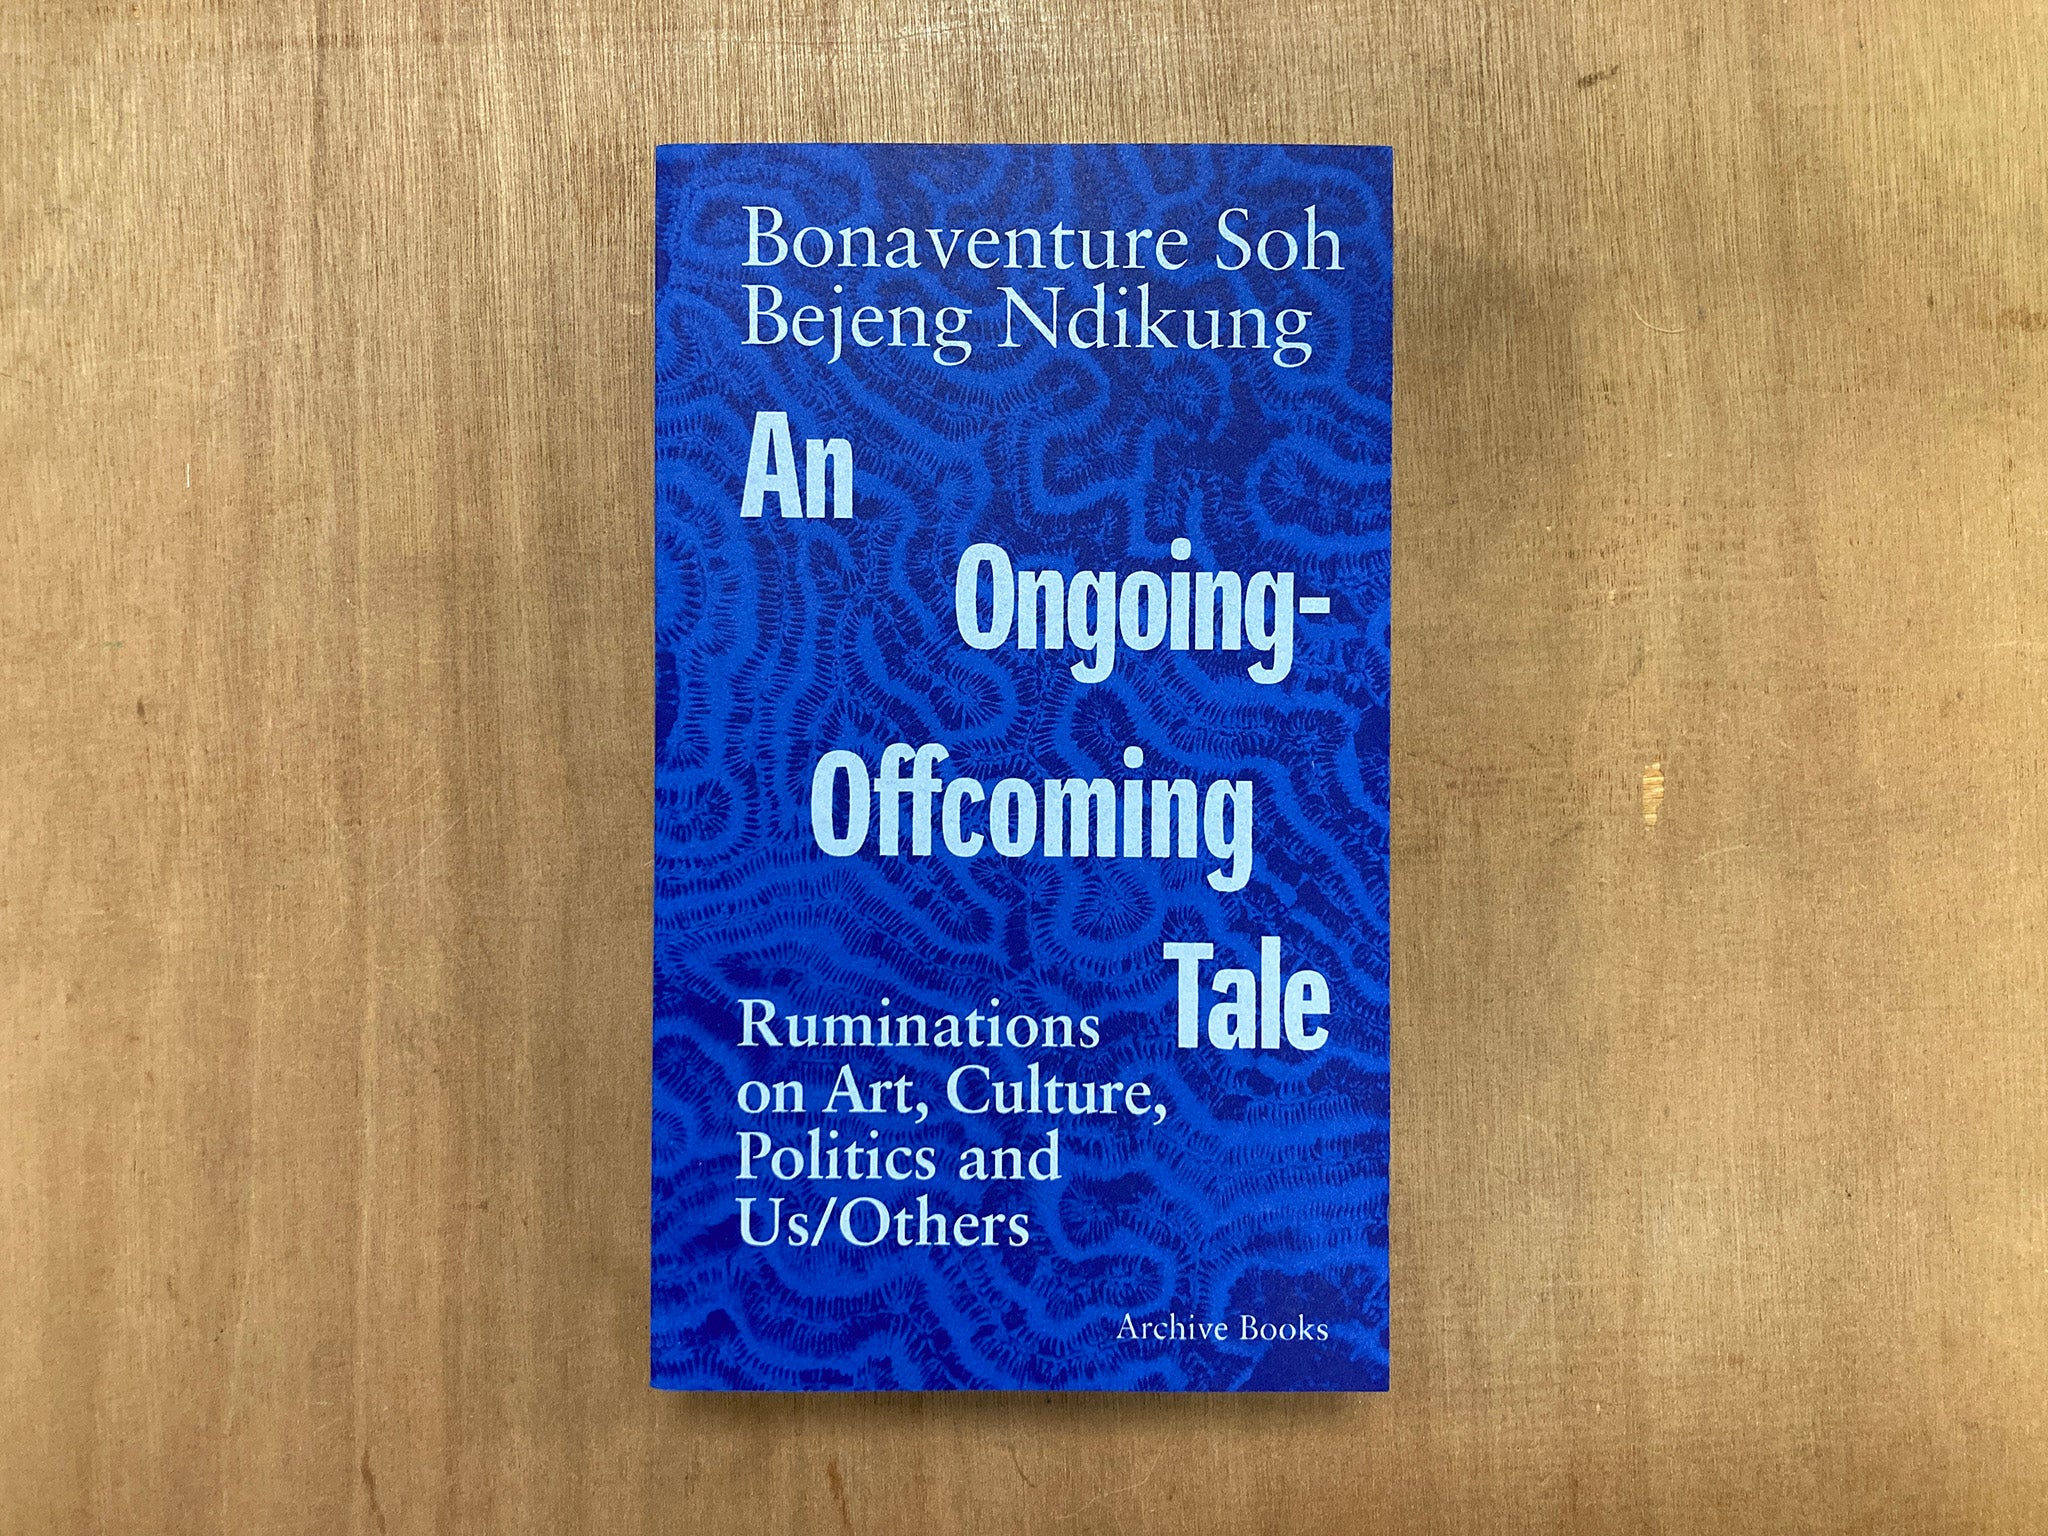 AN ONGOING-OFFCOMING TALE – RUMINATIONS ON ART, CULTURE, POLITICS AND US/OTHERS by Bonaventure Soh Bejeng Ndikung